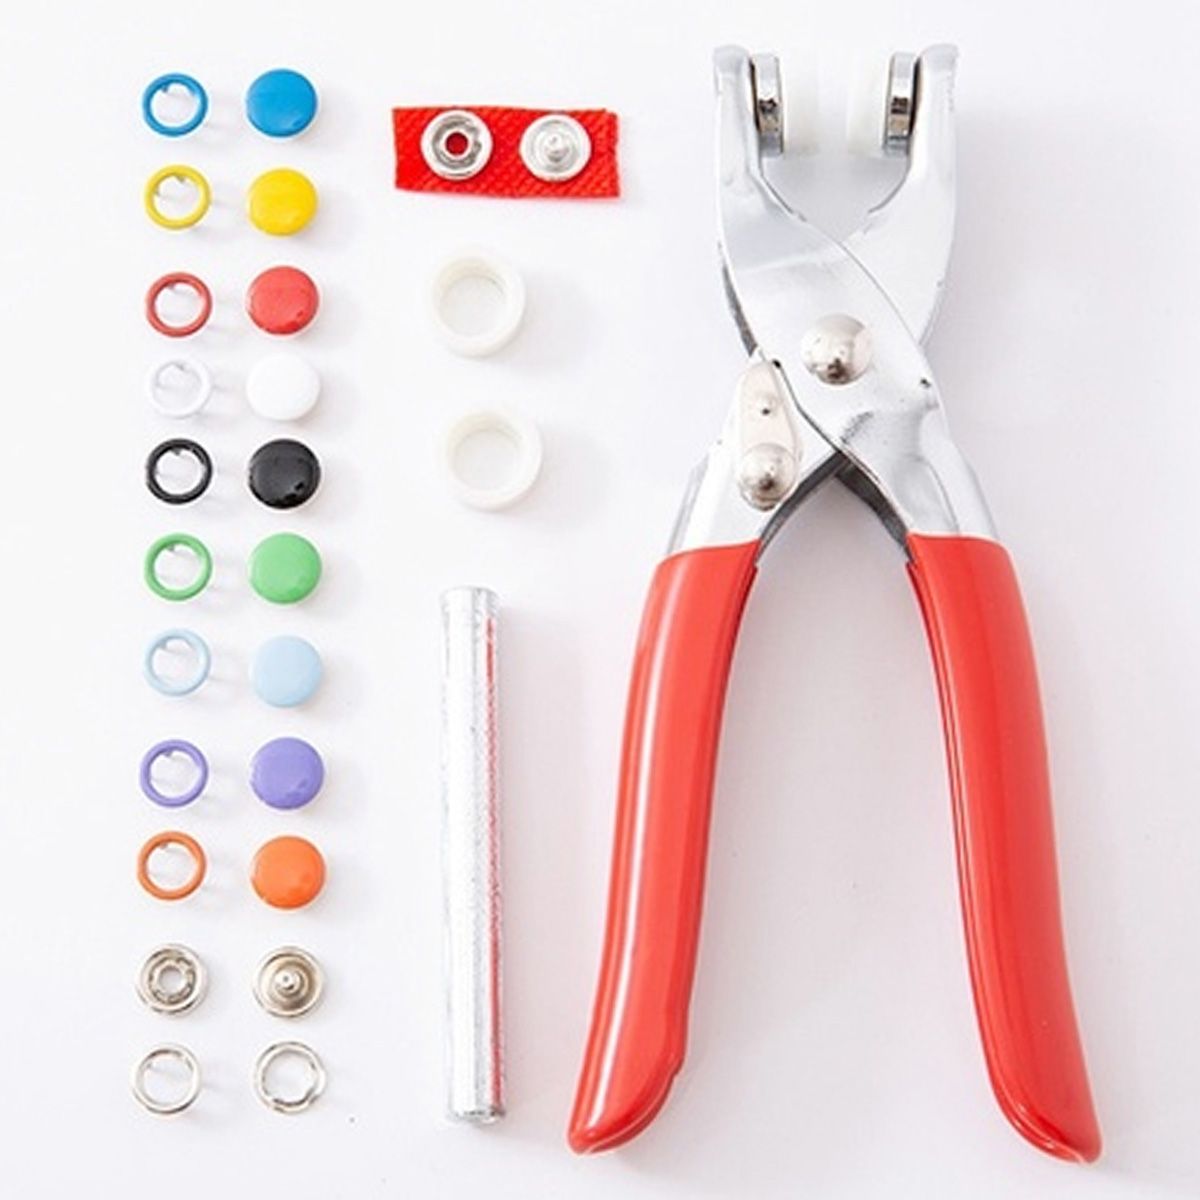 100200-Sets-DIY-Press-Studs-Tools-Kit-Assorted-Colors-Snap-Metal-Sewing-Buttons-1618875